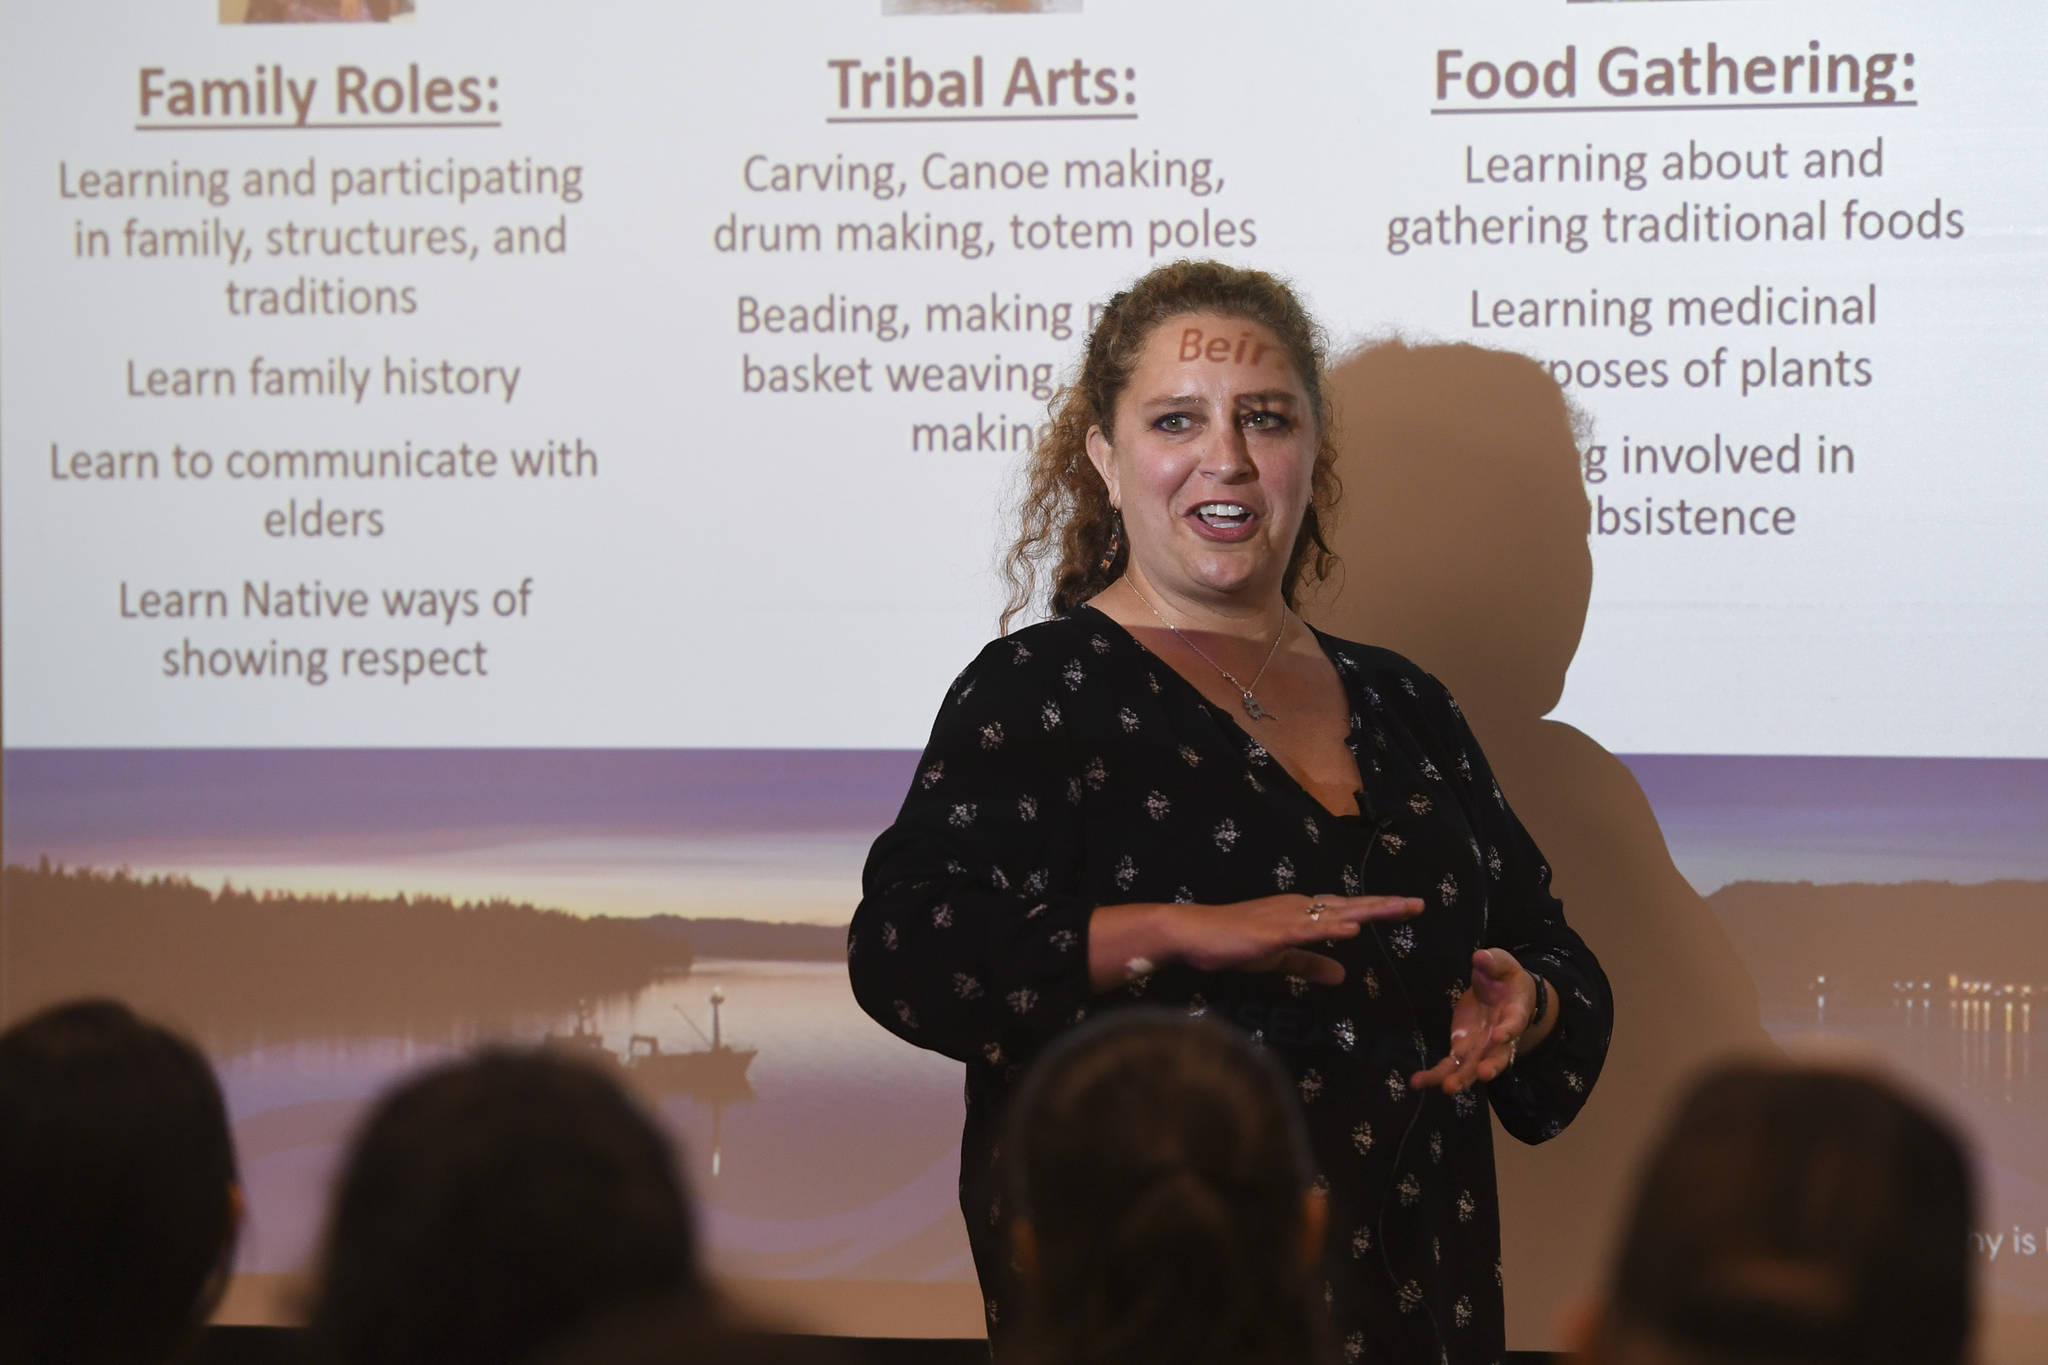 Brenda Thayer, a mental health counselor for SEARHC, speaks of trauma in Native communities during a speech at the Walter Soboleff Center on Tuesday, July 23, 2019. (Michael Penn | Juneau Empire)